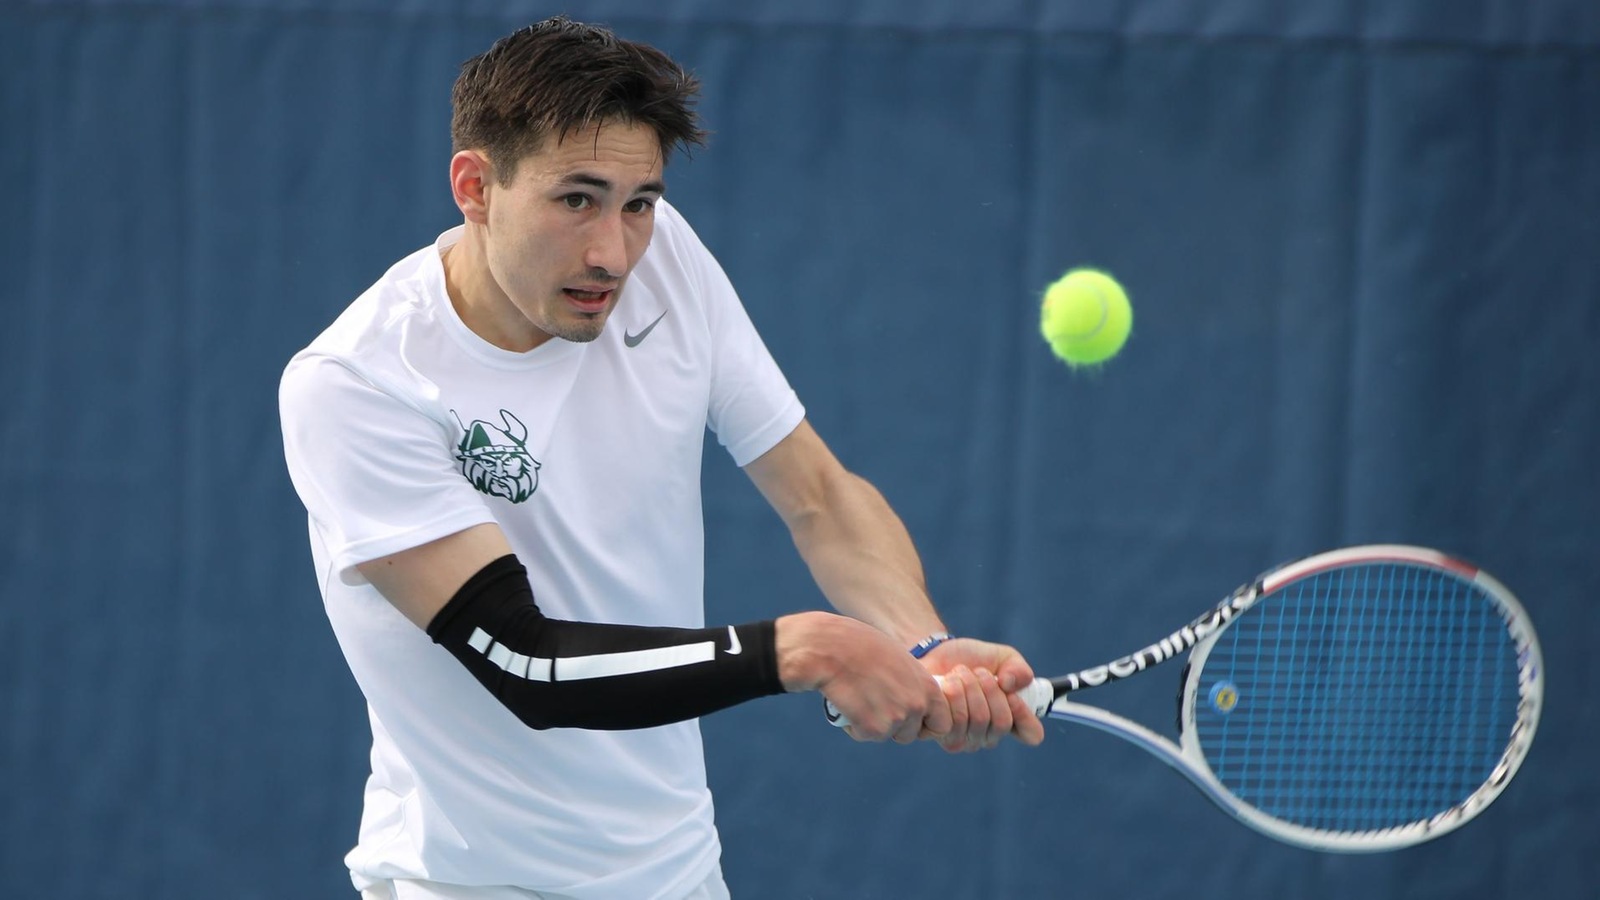 Cleveland State Men’s Tennis Continues Play At Viking Invitational